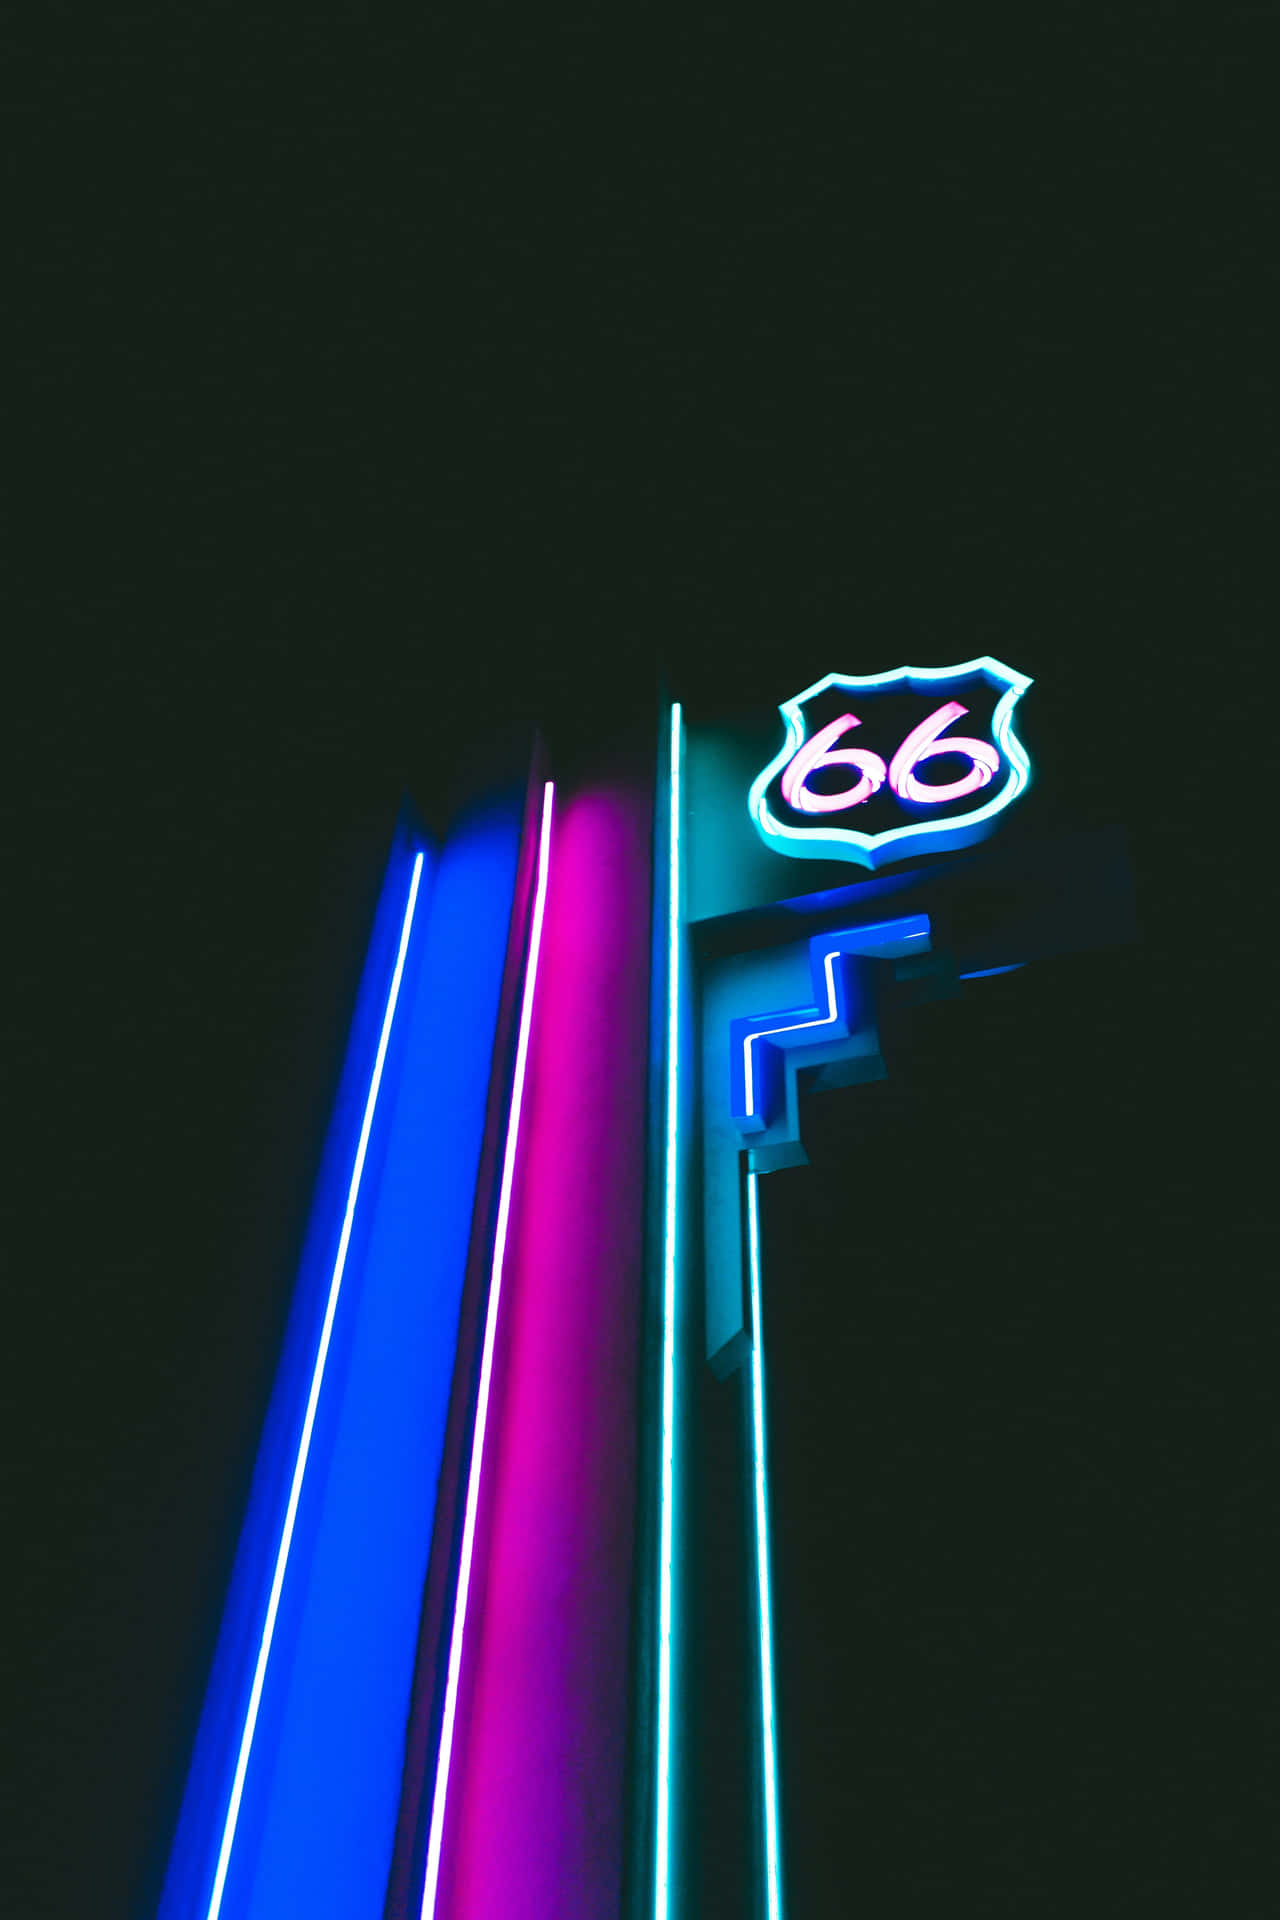 Neon Route66 Signage Wallpaper